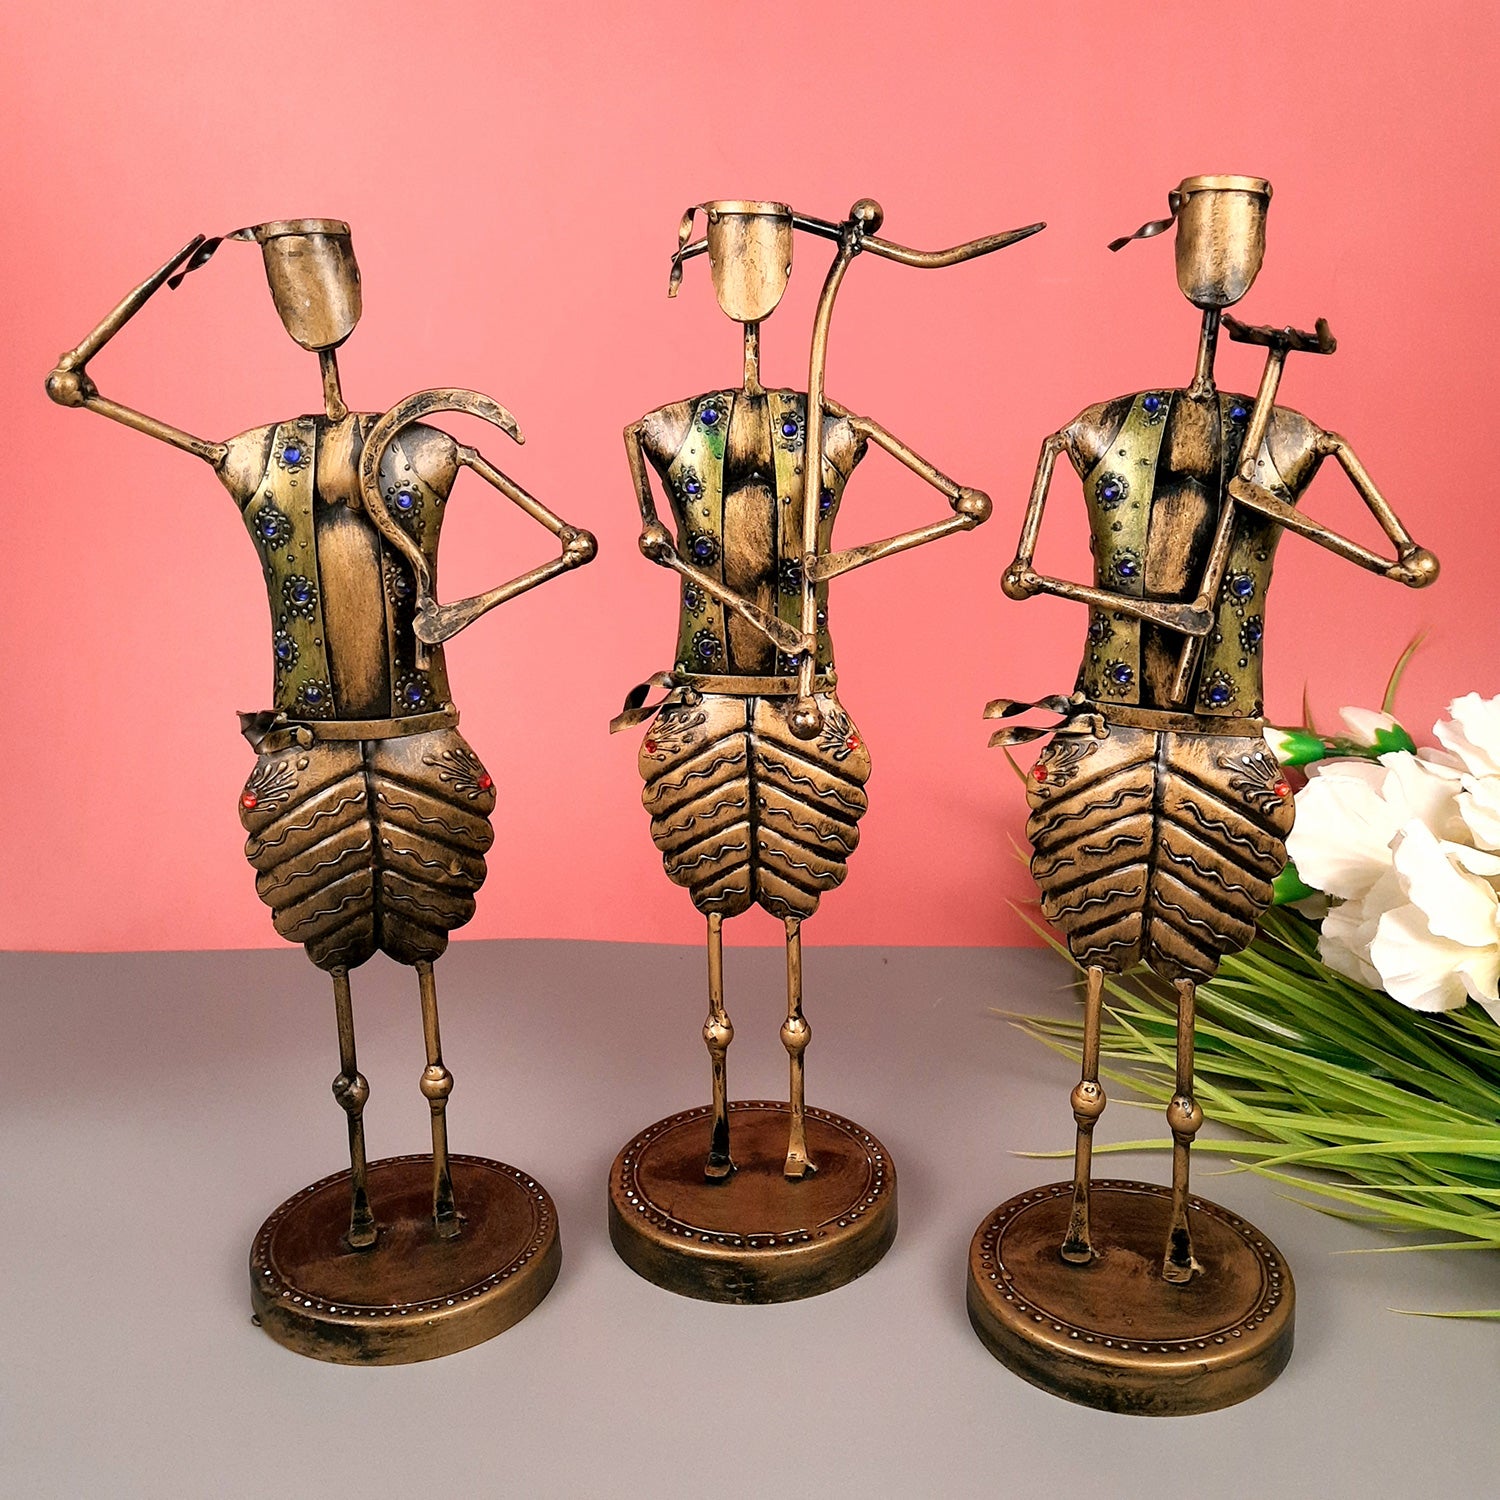 Showpiece Set - Farmers / Village Workers Figurines - Artifacts for Home, Table, Living Room, TV Unit & Bedroom Decor | Decorative Showpieces for Gifts - 14 Inch (Set of 3) - Apkamart